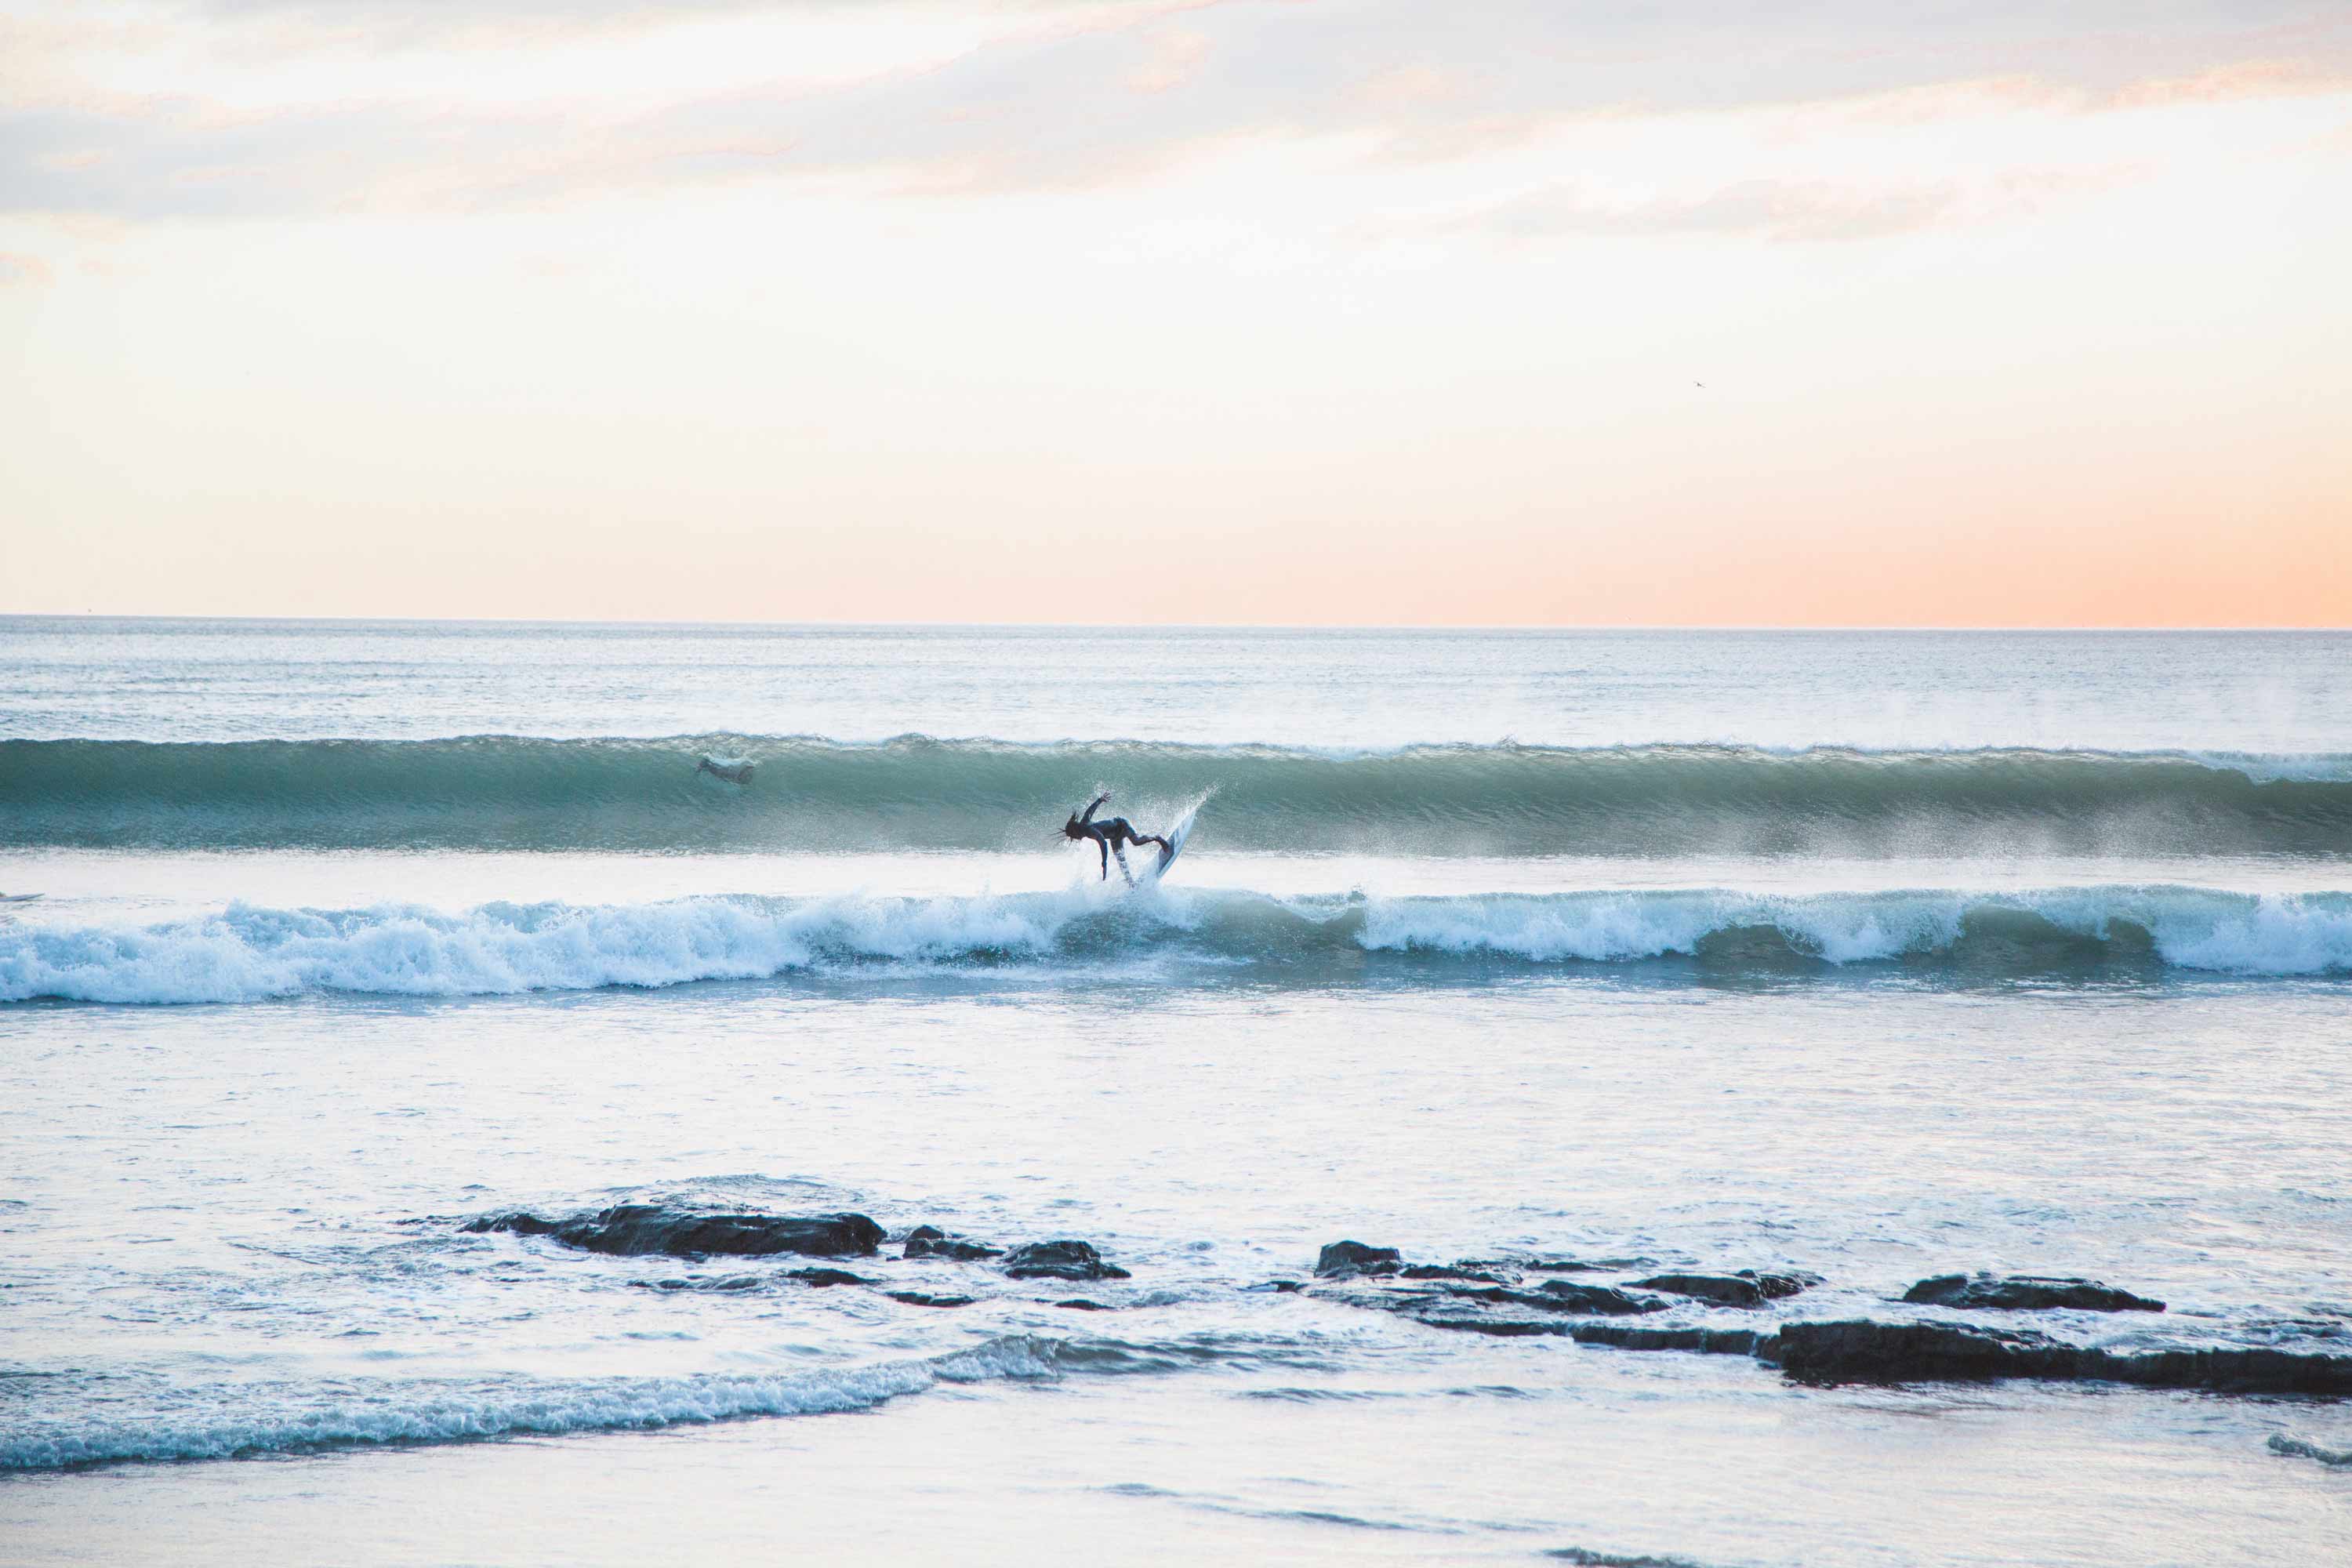 5 Things To Do When You Have 2 Years Of Surf Experience